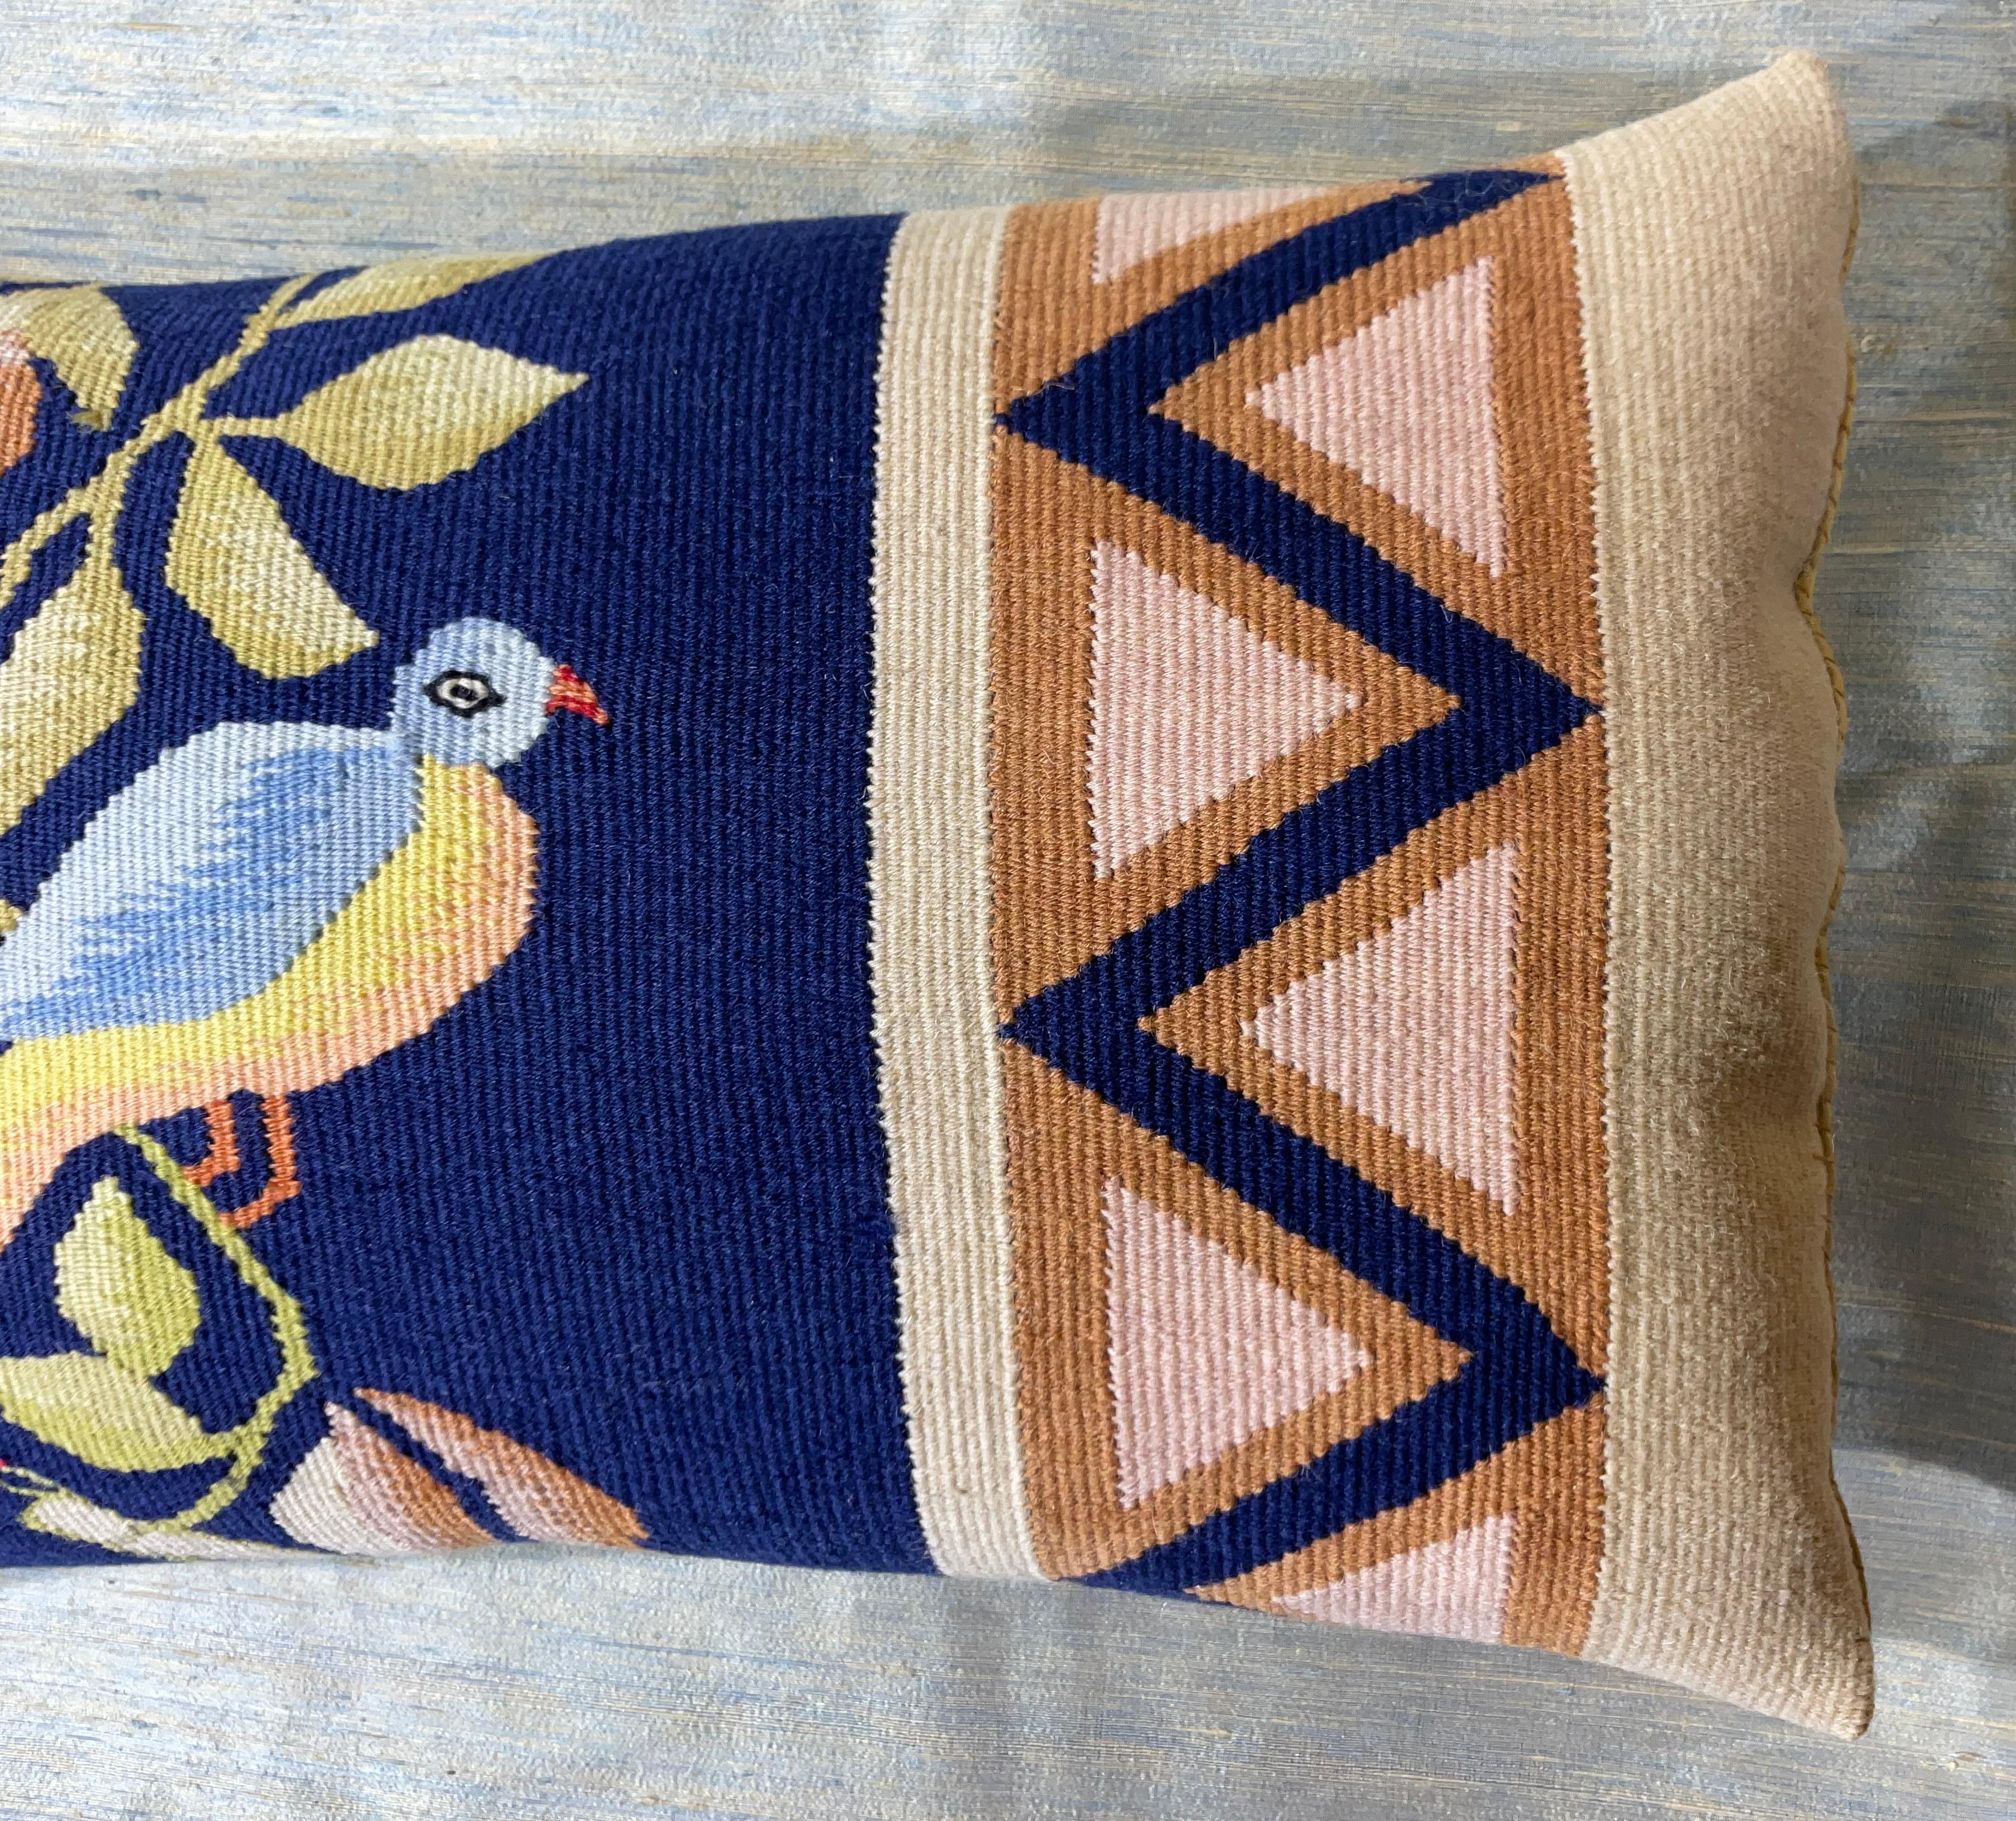 Elegant Single Decorative Hand Woven Pillow In Good Condition For Sale In Delray Beach, FL